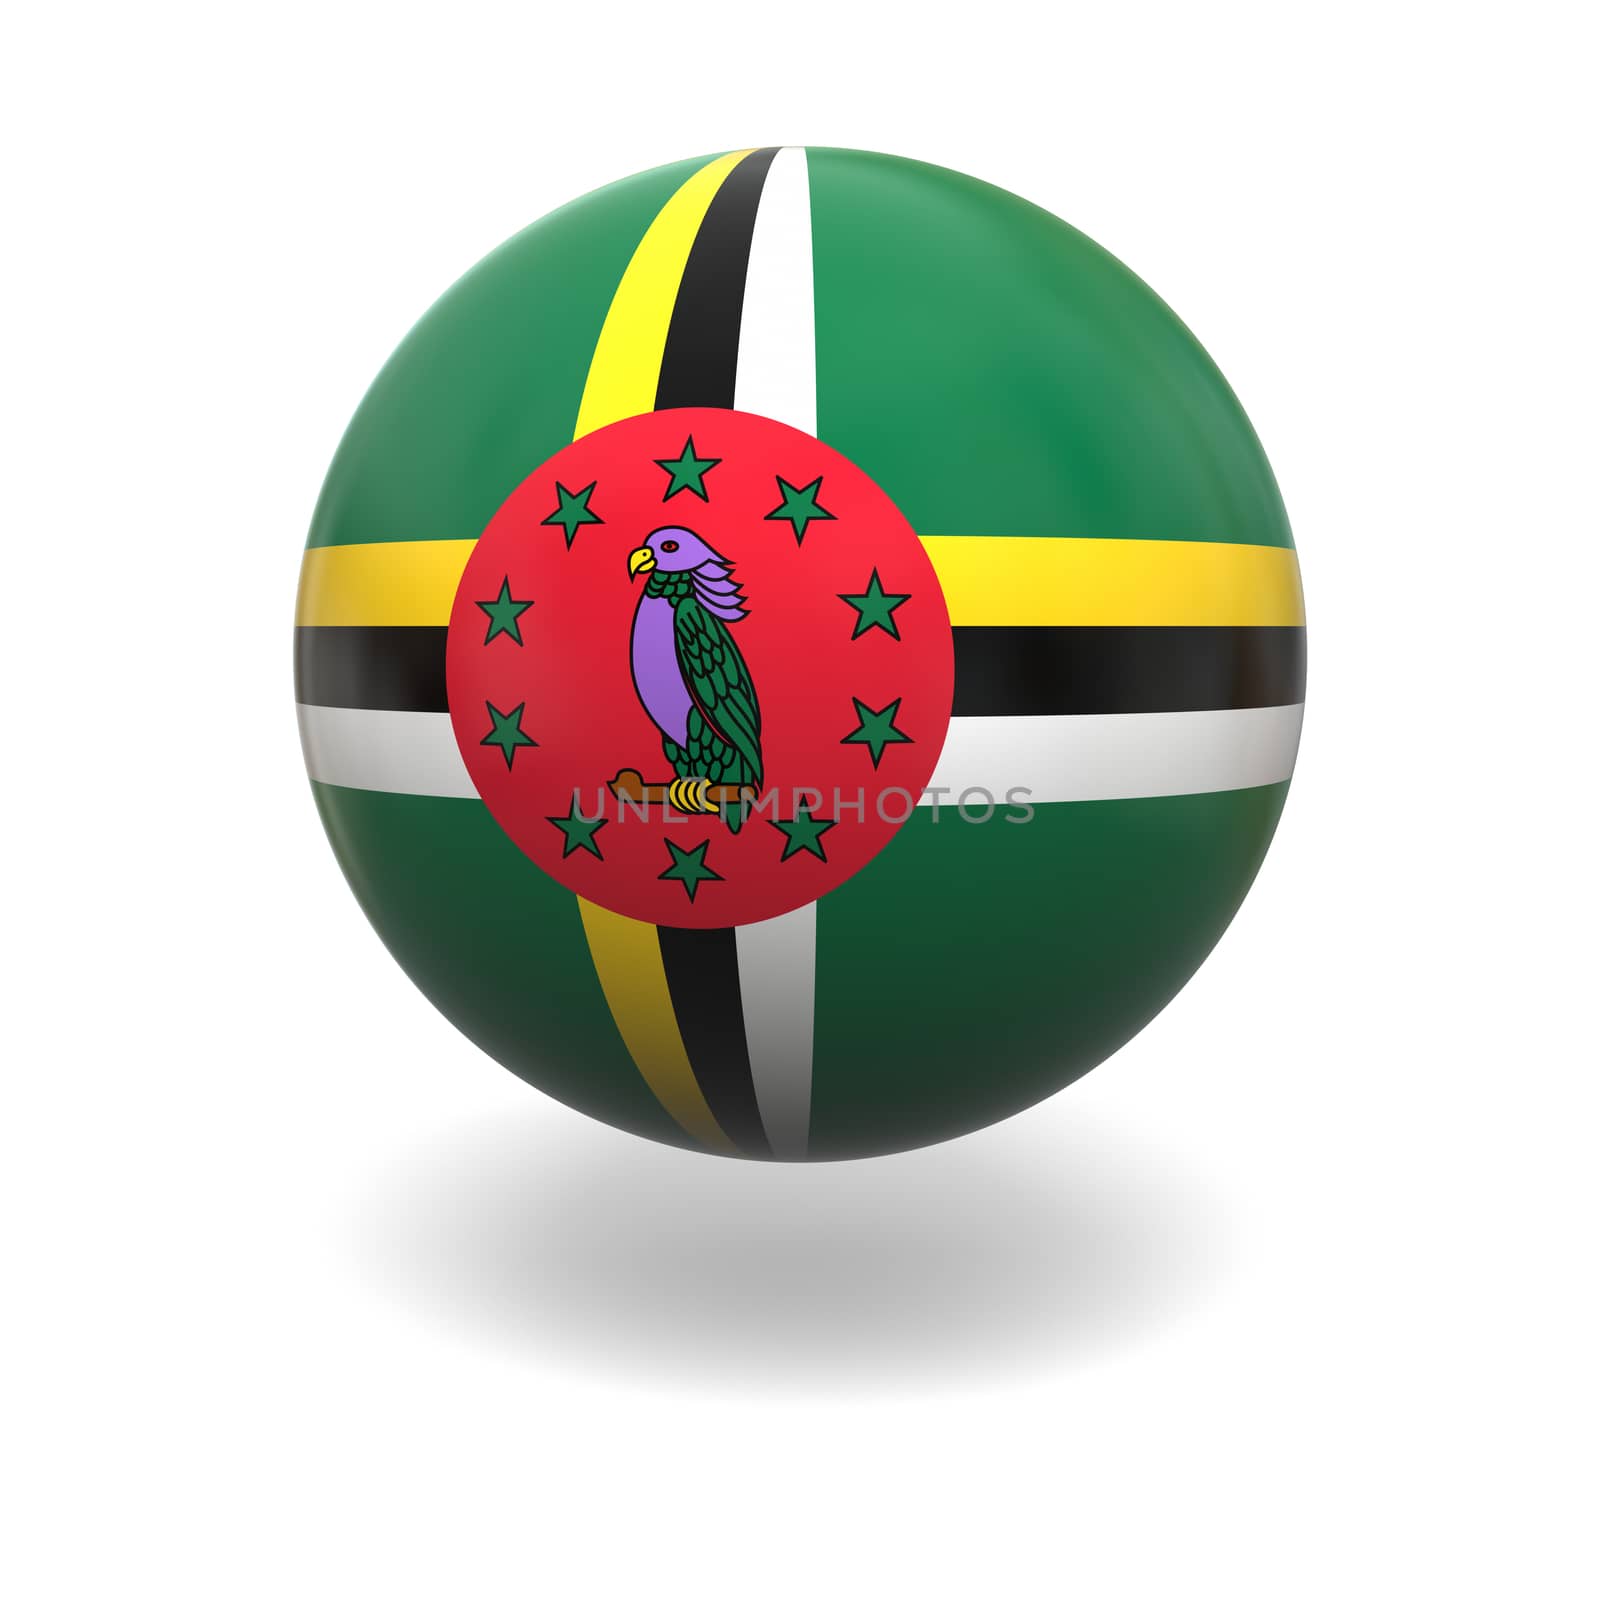 Dominica flag by Harvepino